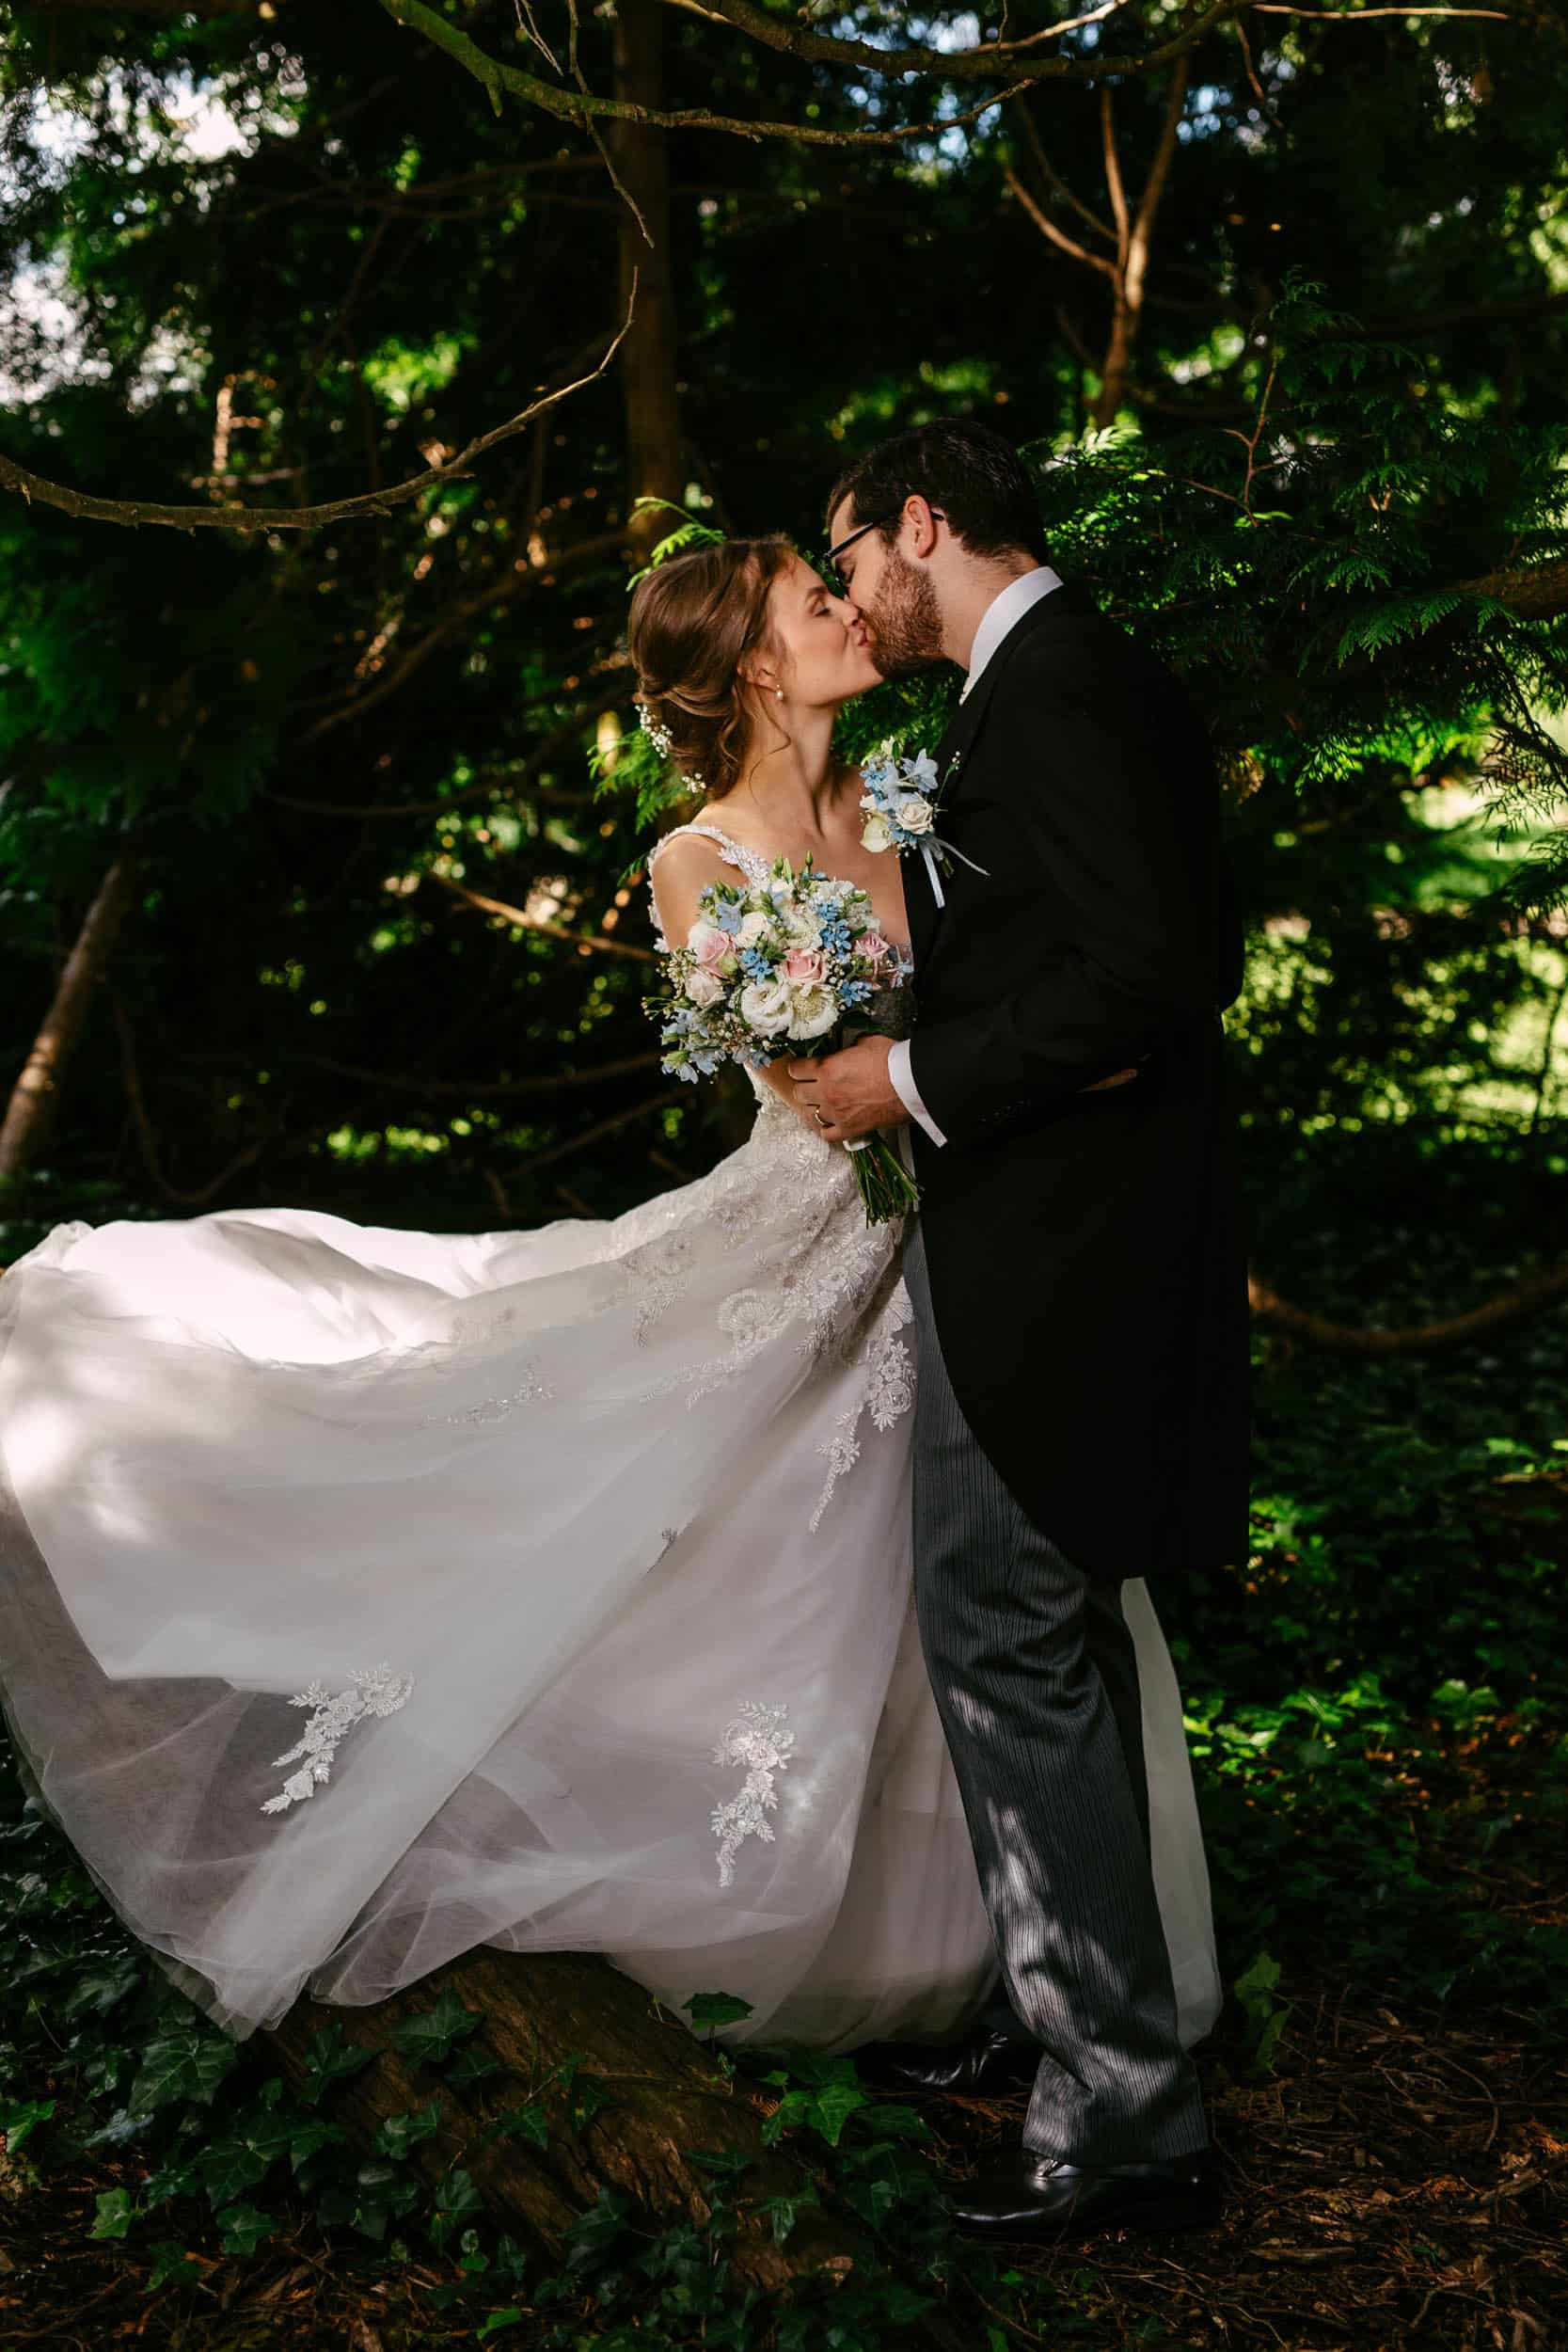 A bride and groom embracing amid the enchanting beauty of a botanical garden.